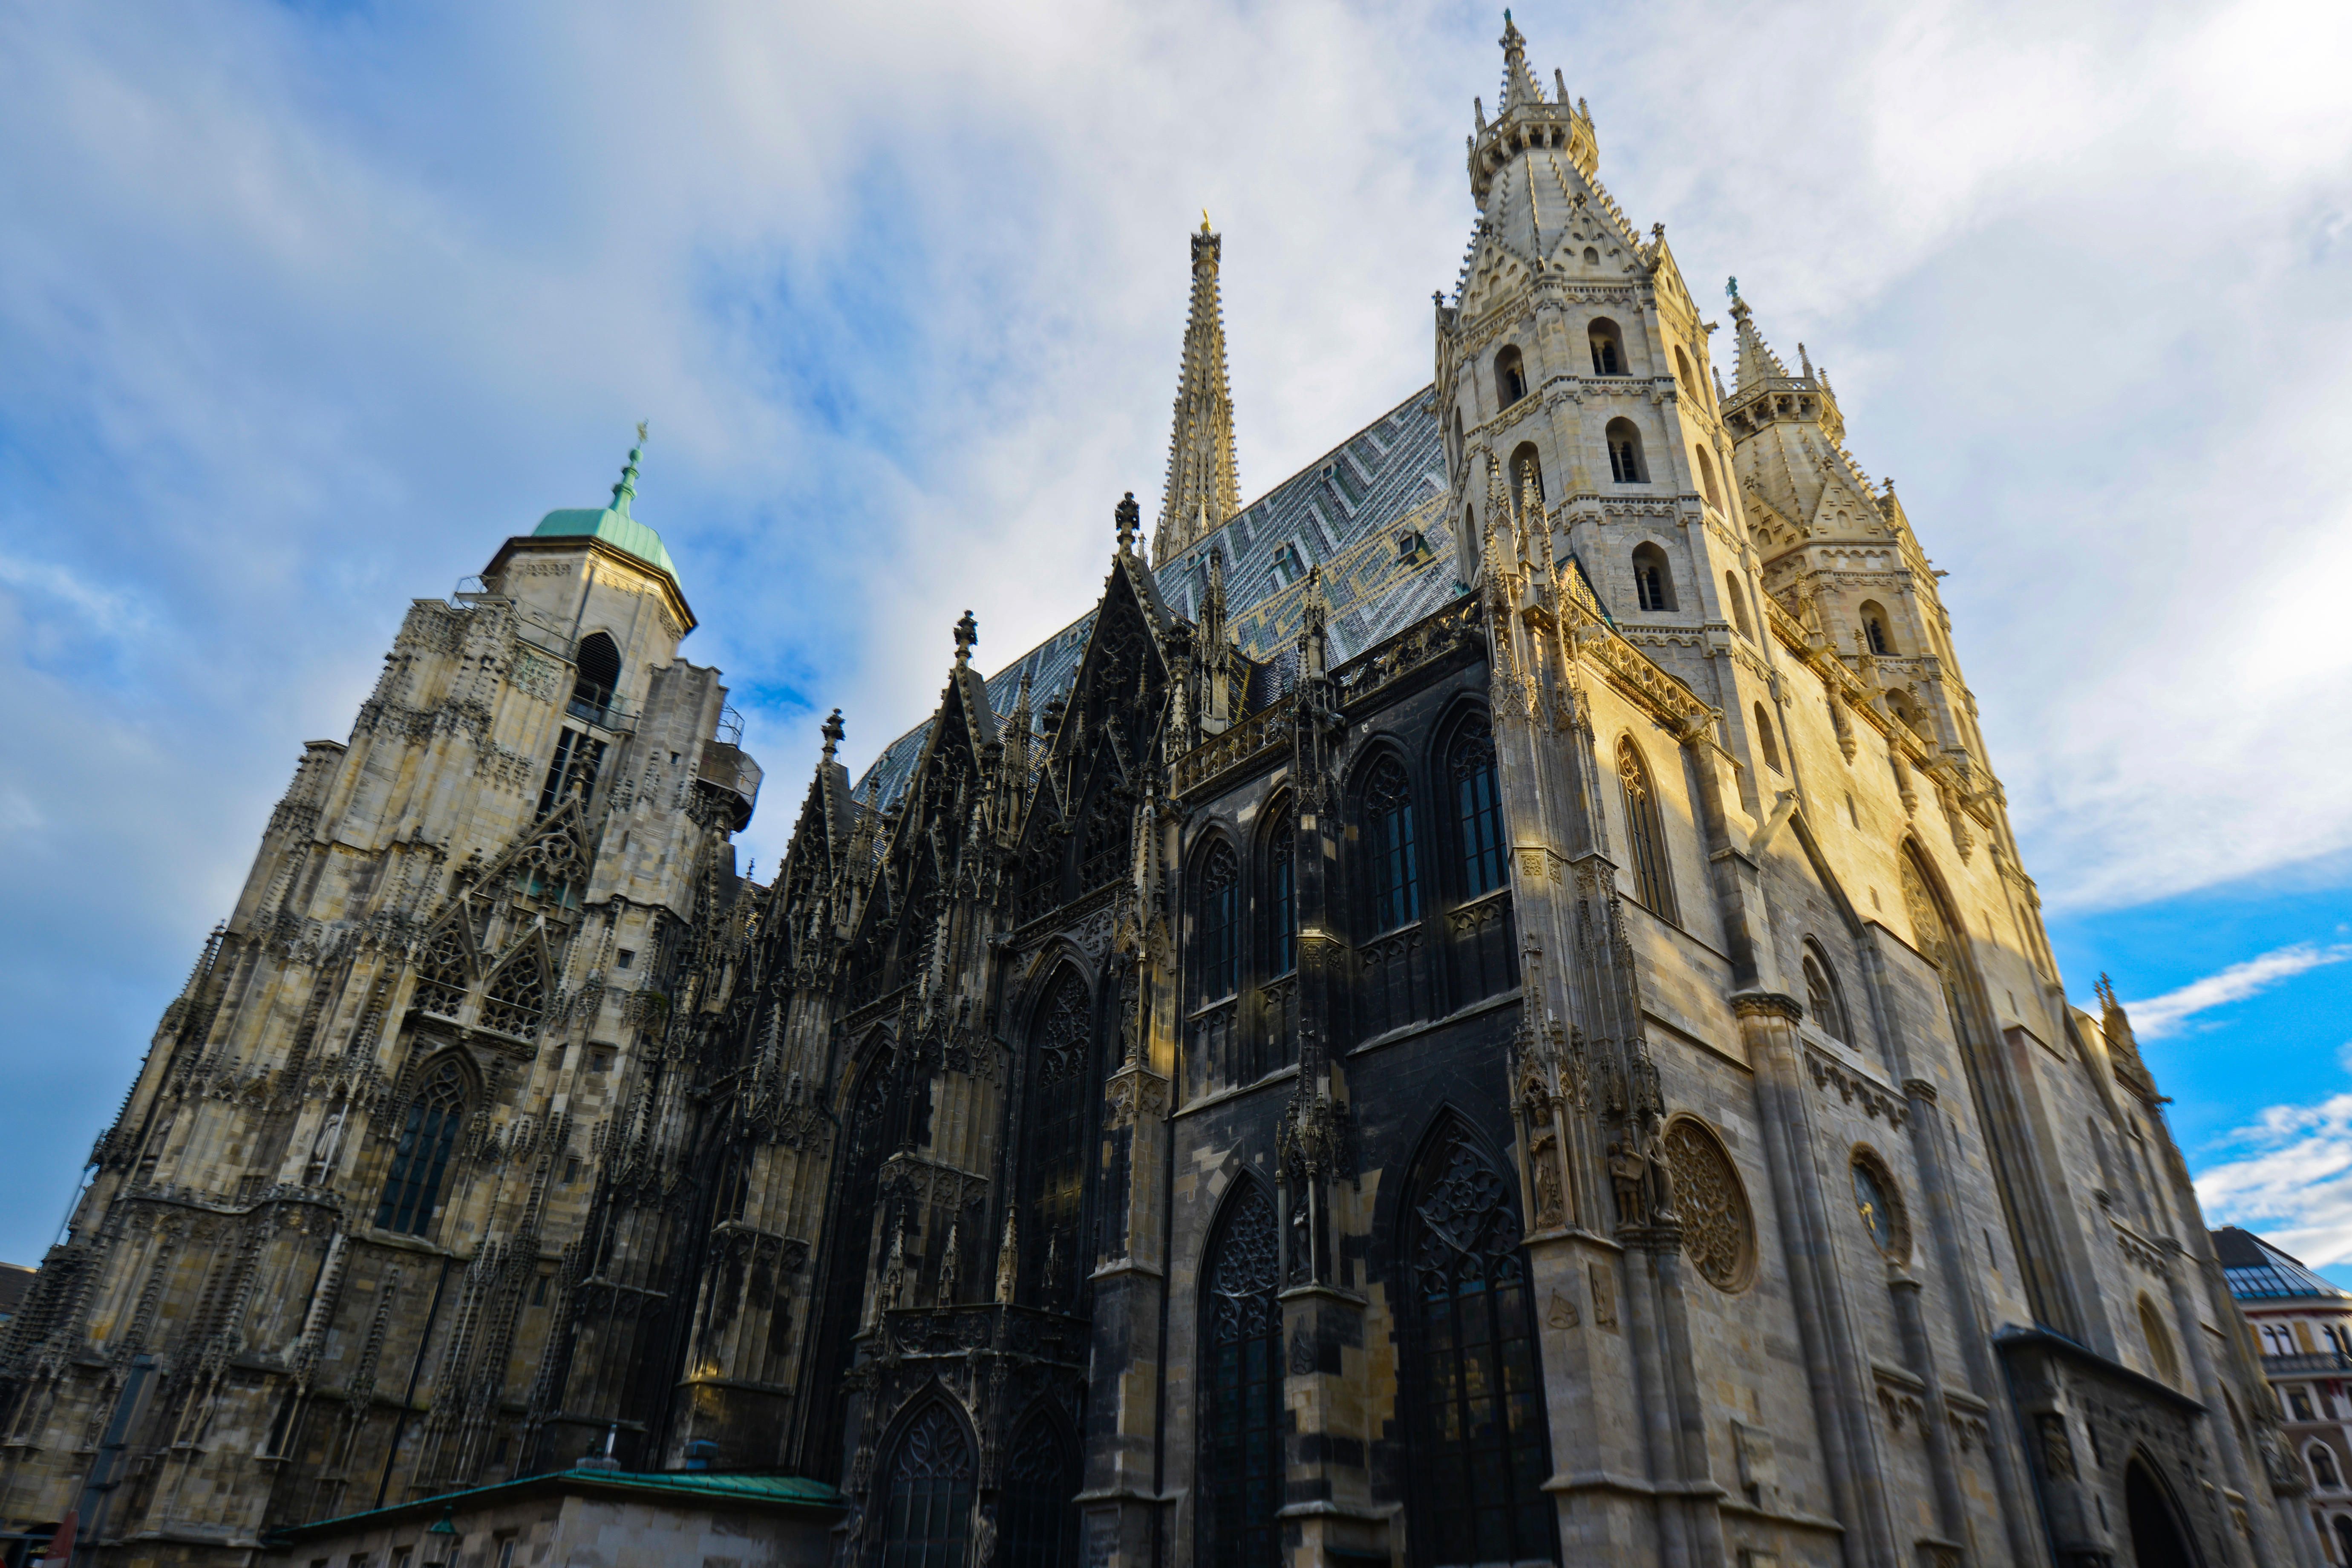 Armed police outside Vienna’s churches following Islamist terror warnings